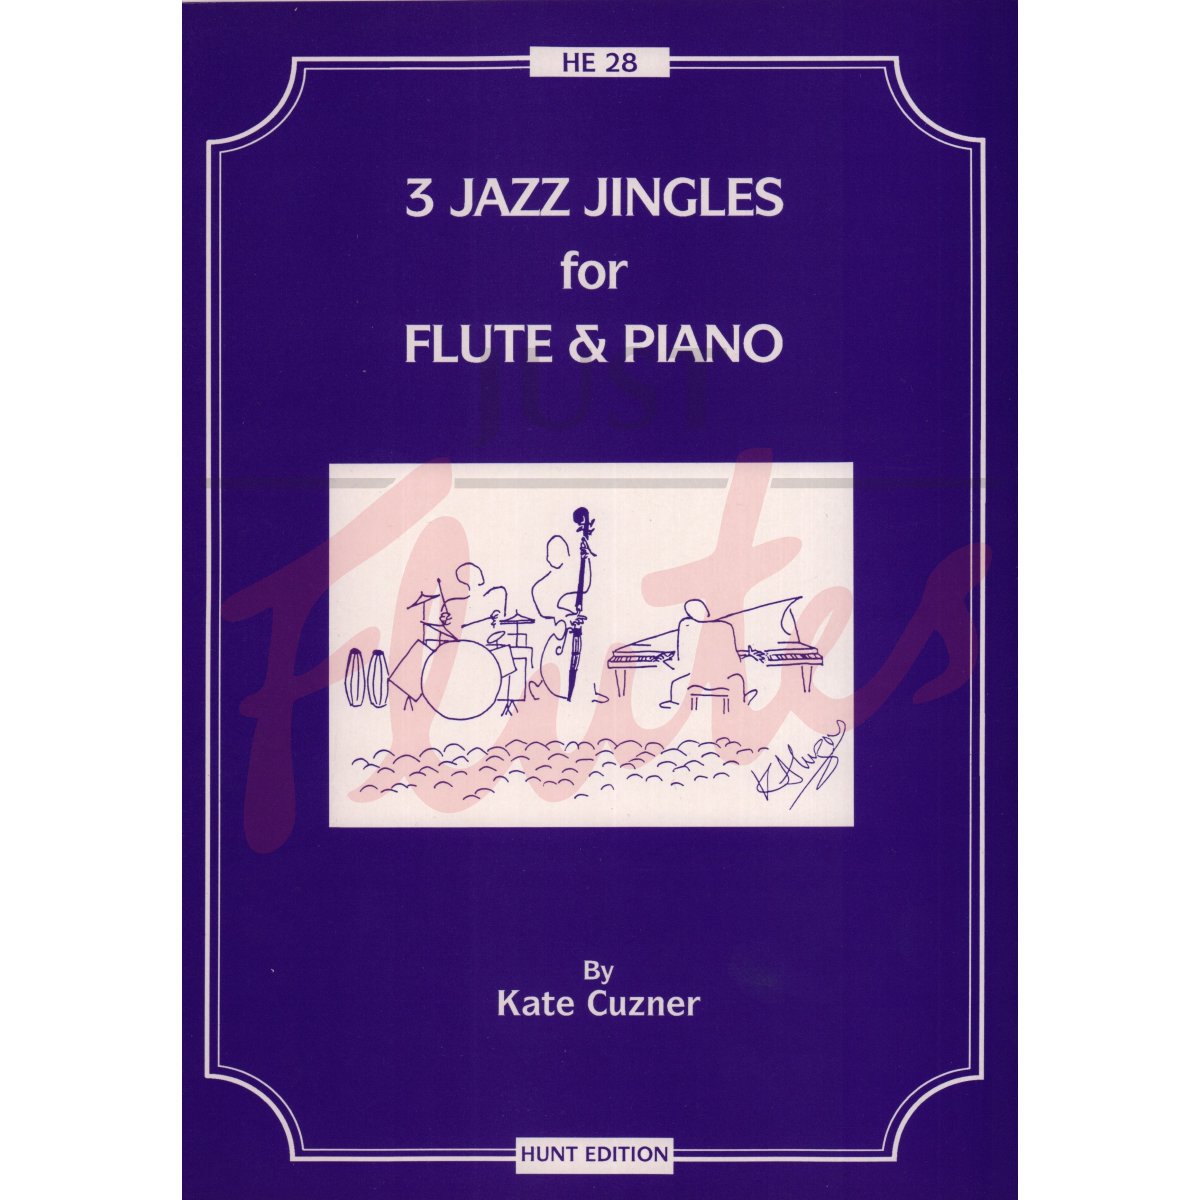 Three Jazz Jingles for Flute and Piano